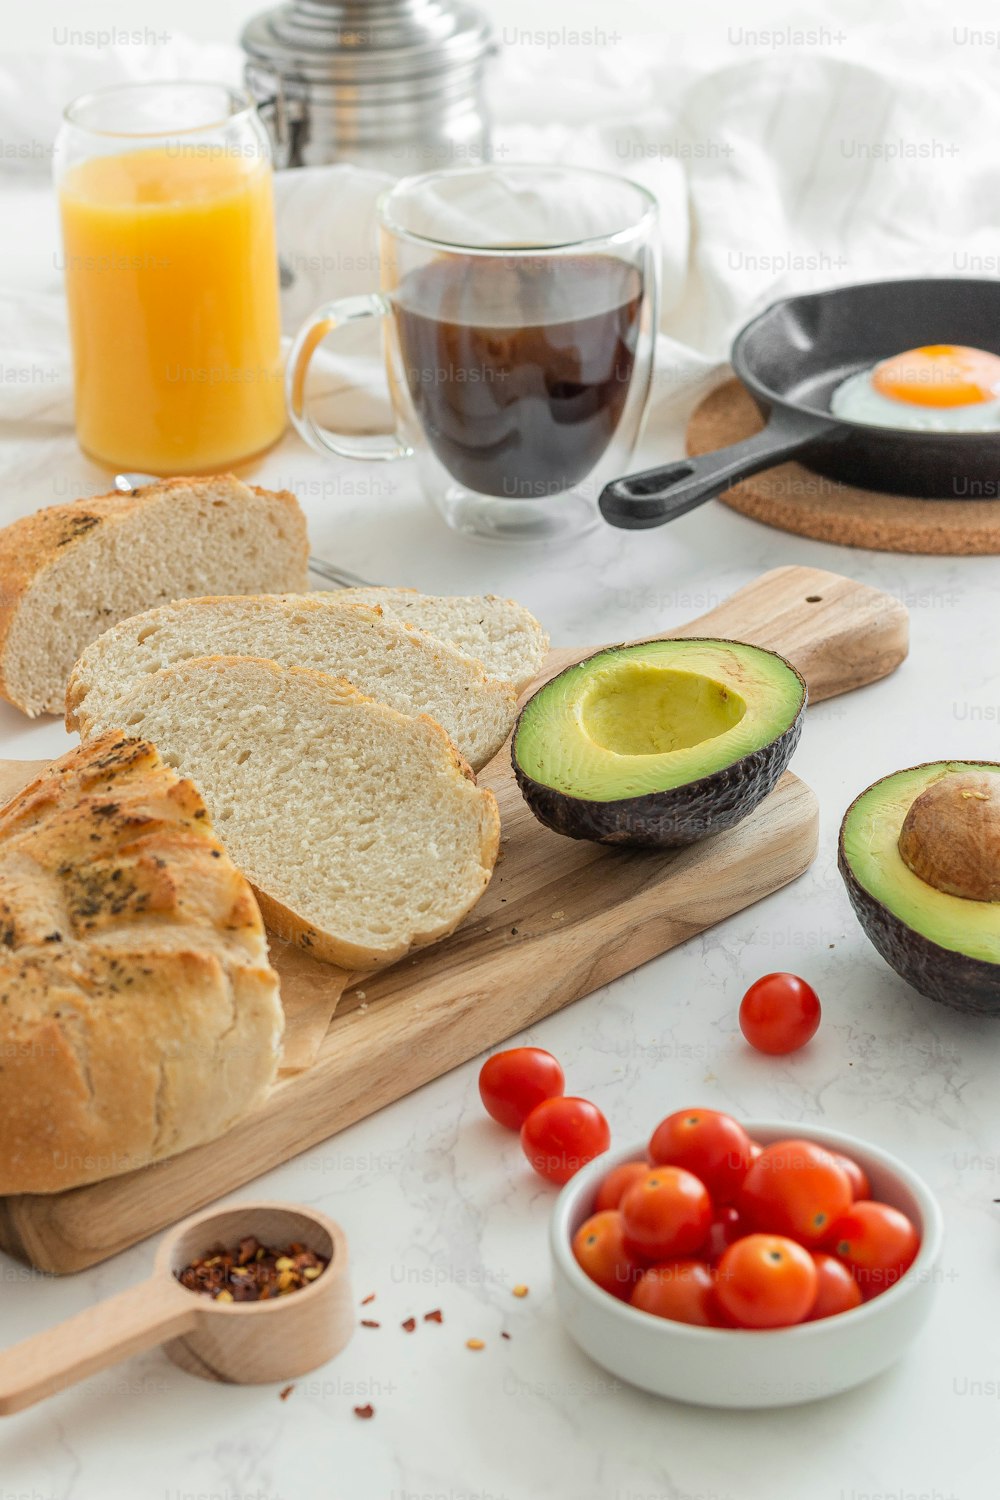 a table with bread, tomatoes, avocado, and other foods